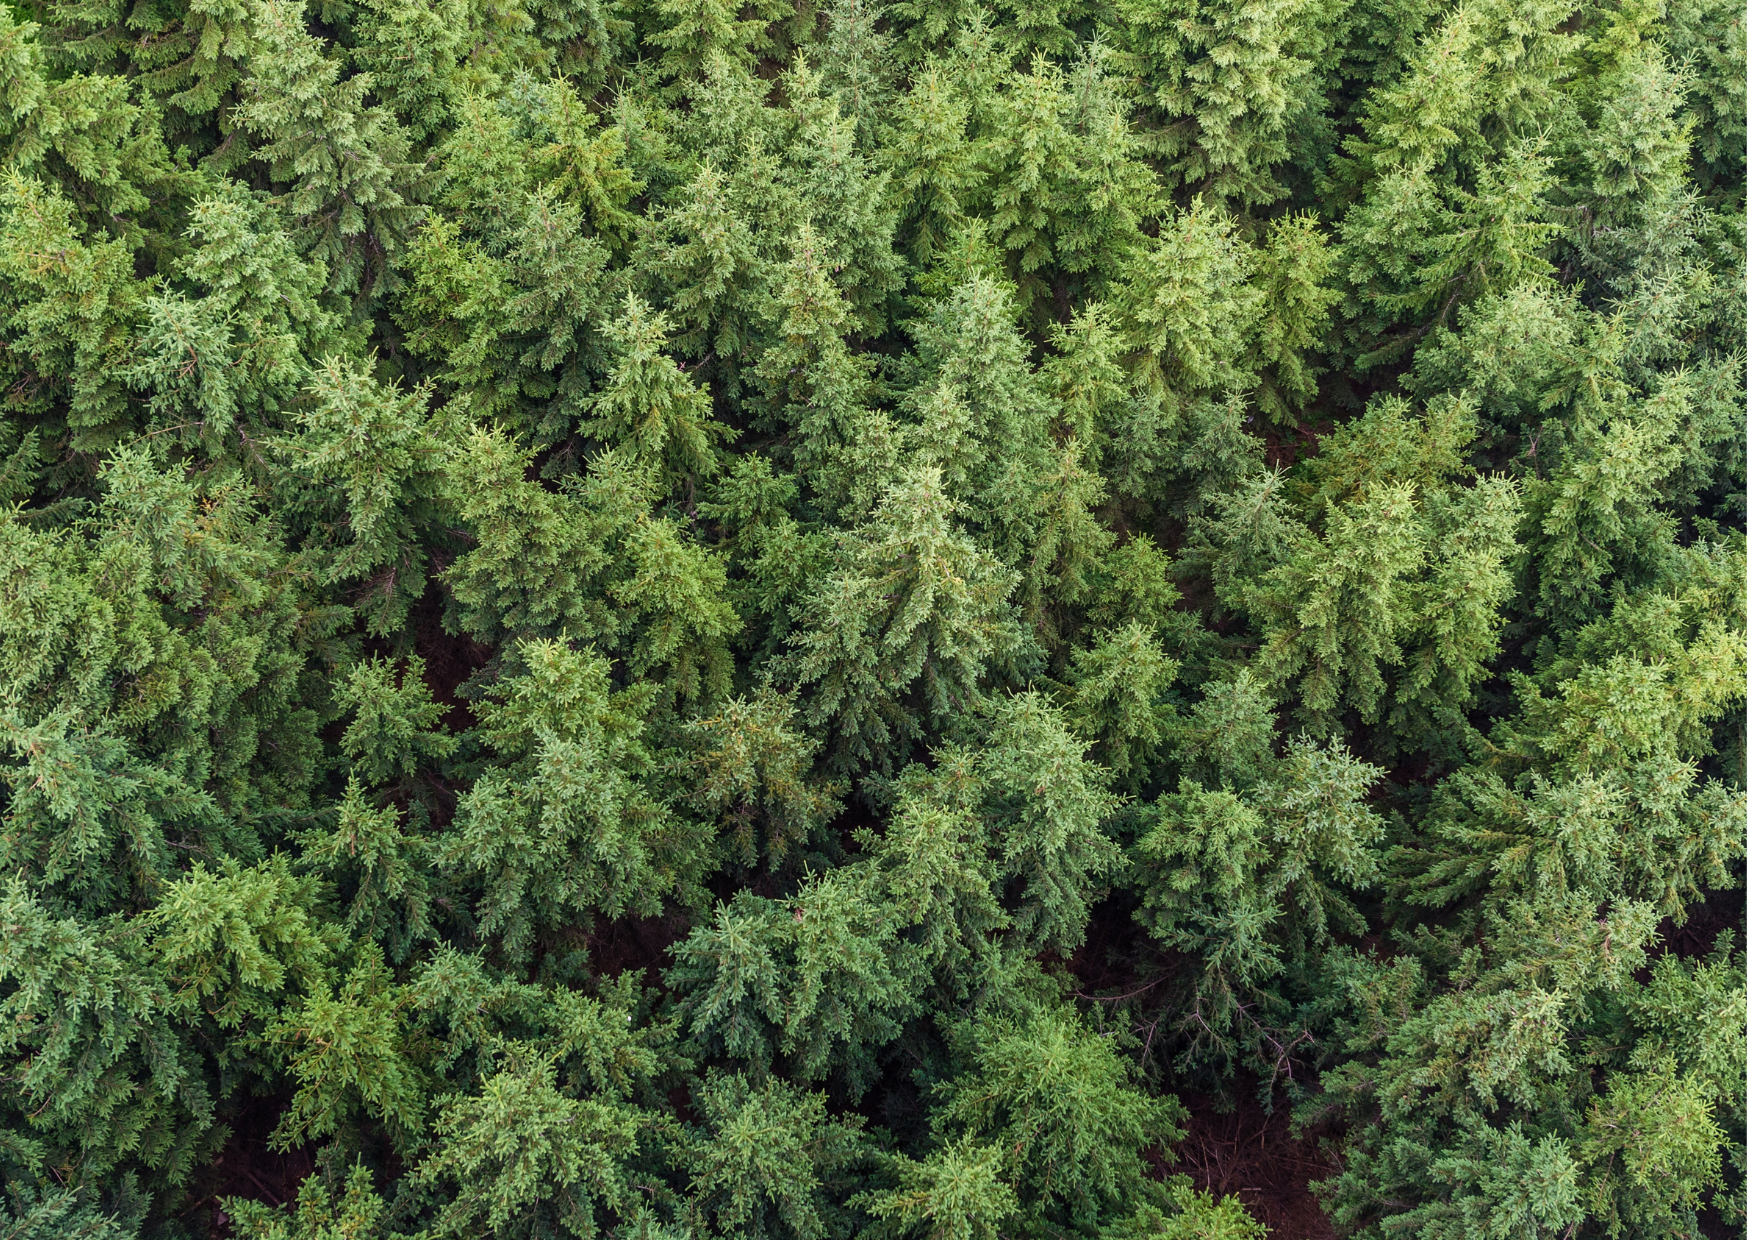 arial view of a dense forest full of pine trees 